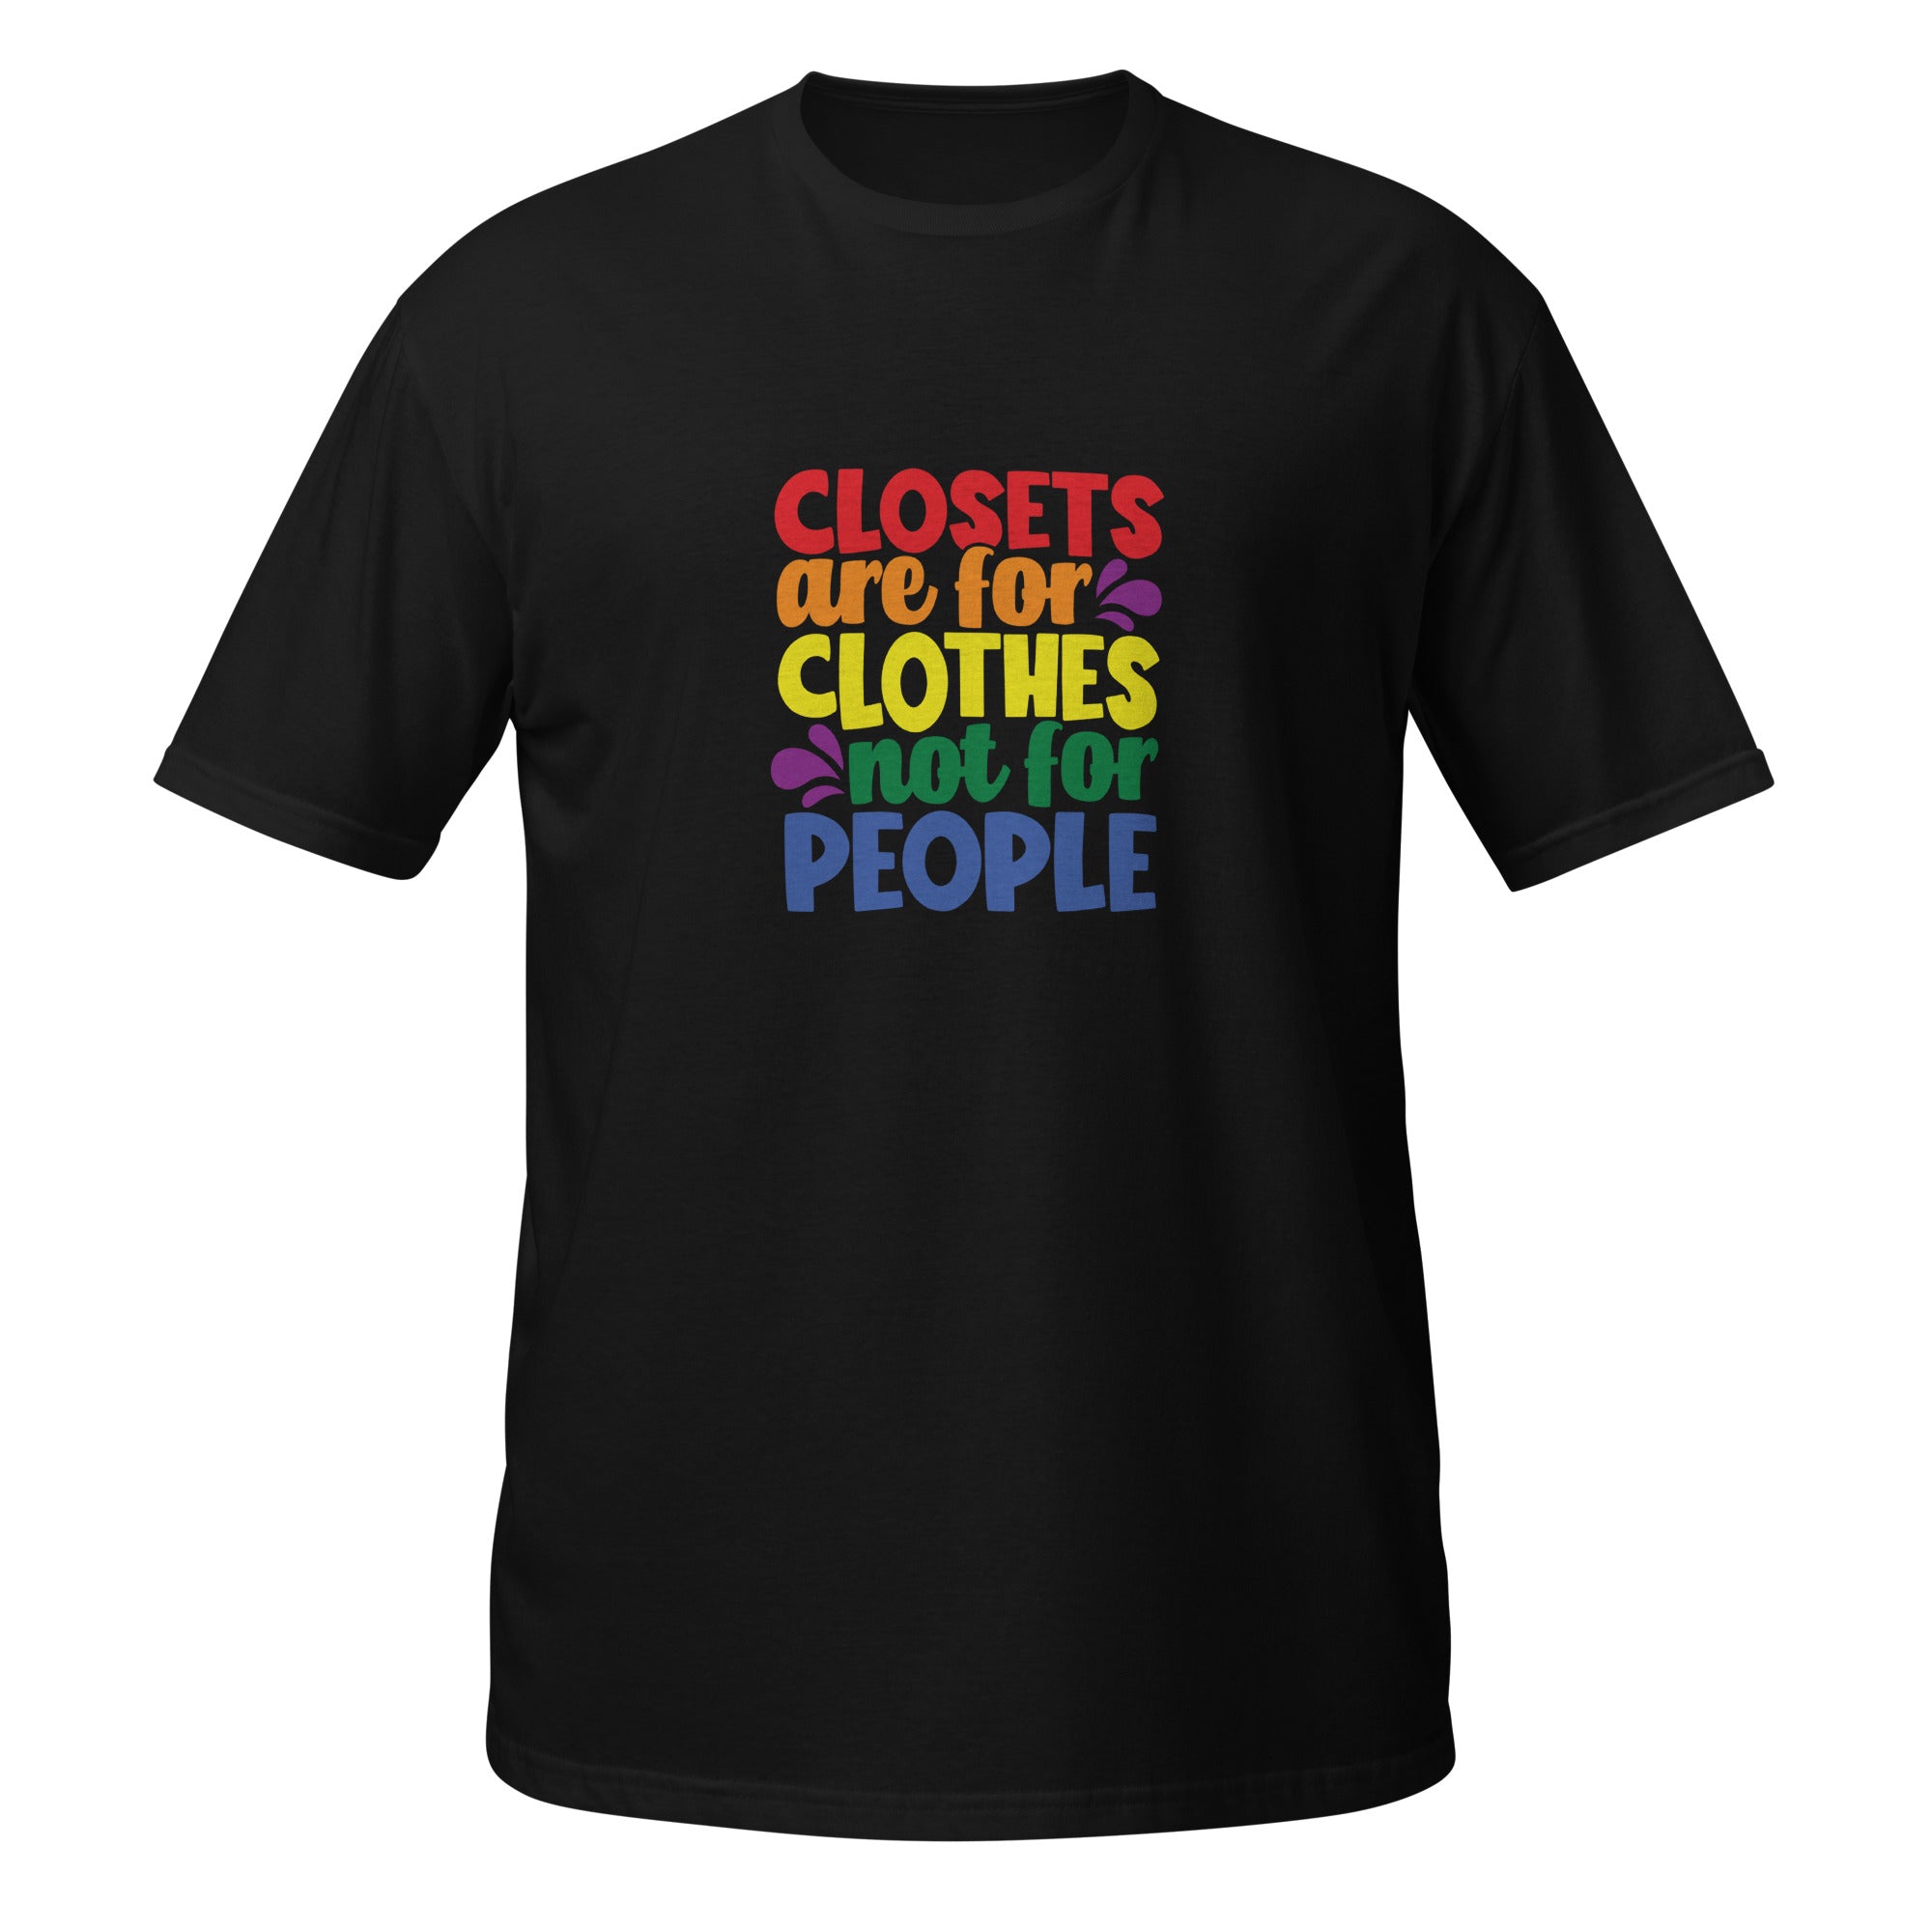 Short-Sleeve Unisex T-Shirt- Closets are for clothes not for people